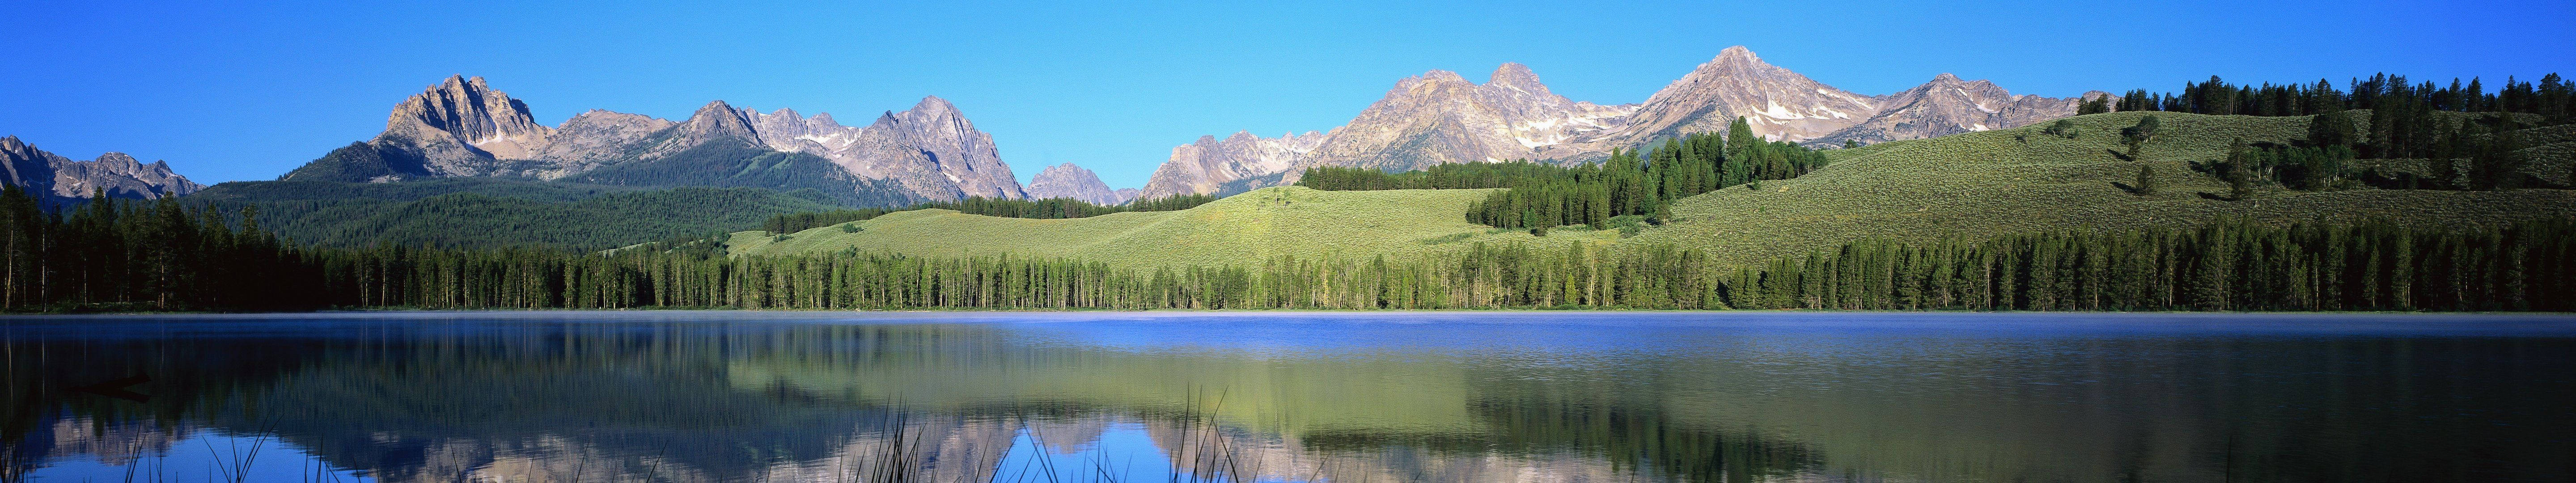 4K Dual Monitor Lake With View Of Mountains Wallpaper